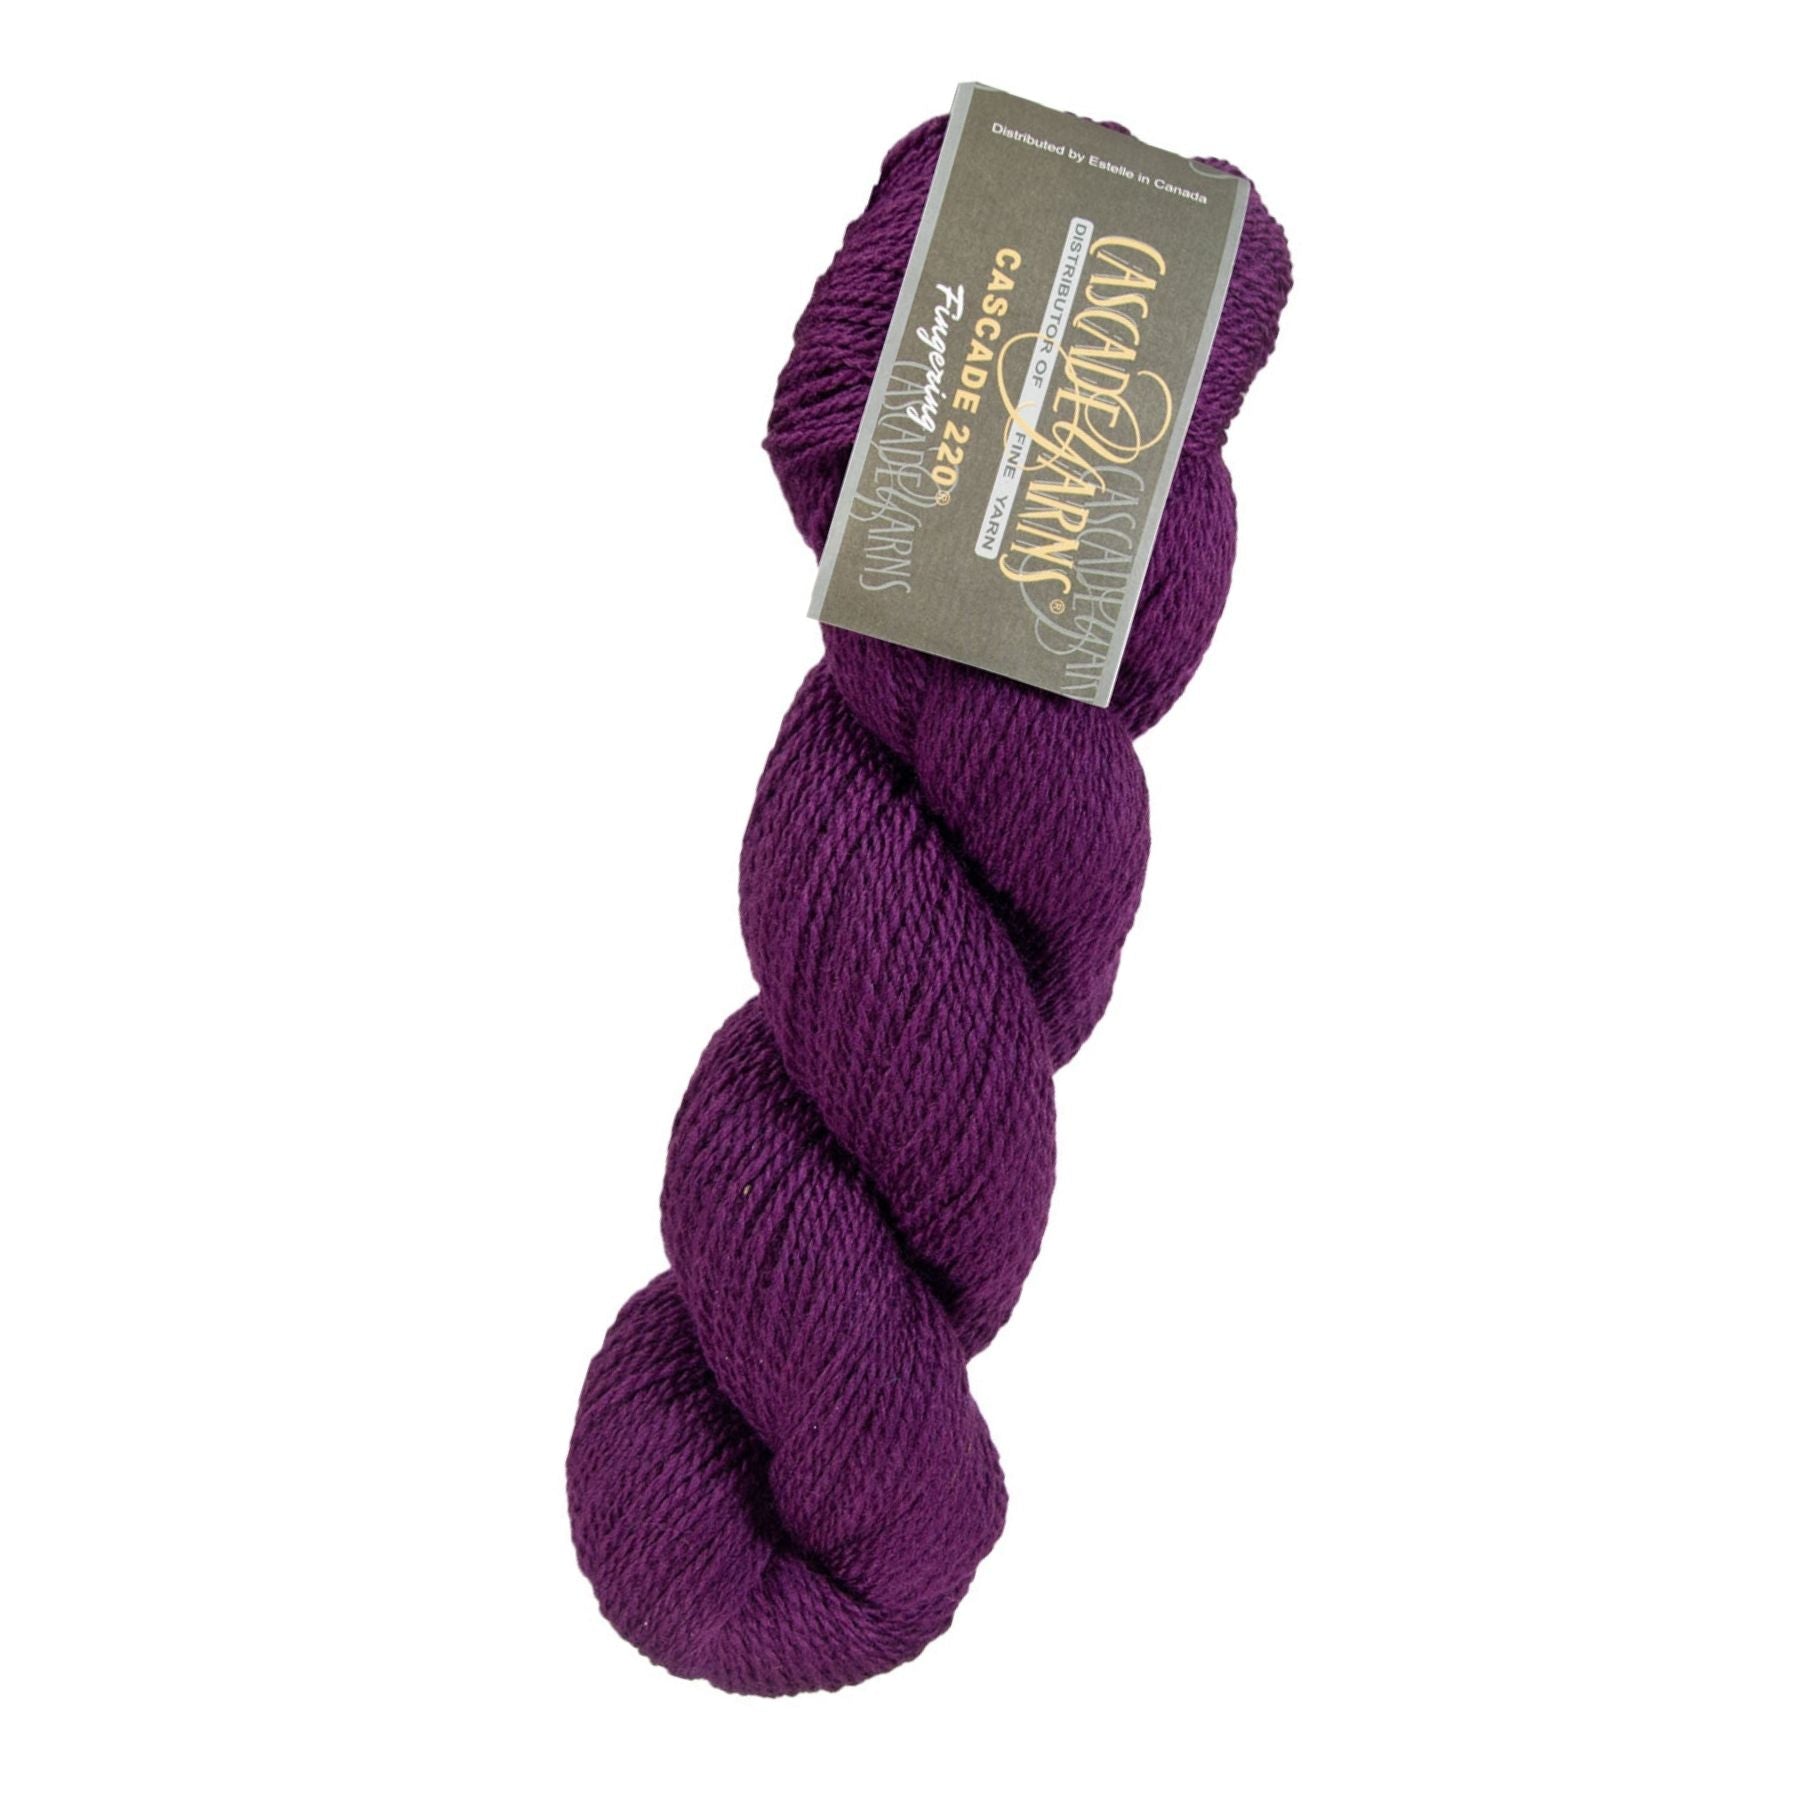 Skein of Cascade 220 Fingering Sock weight yarn in the color Dark Plum (Purple) for knitting and crocheting.